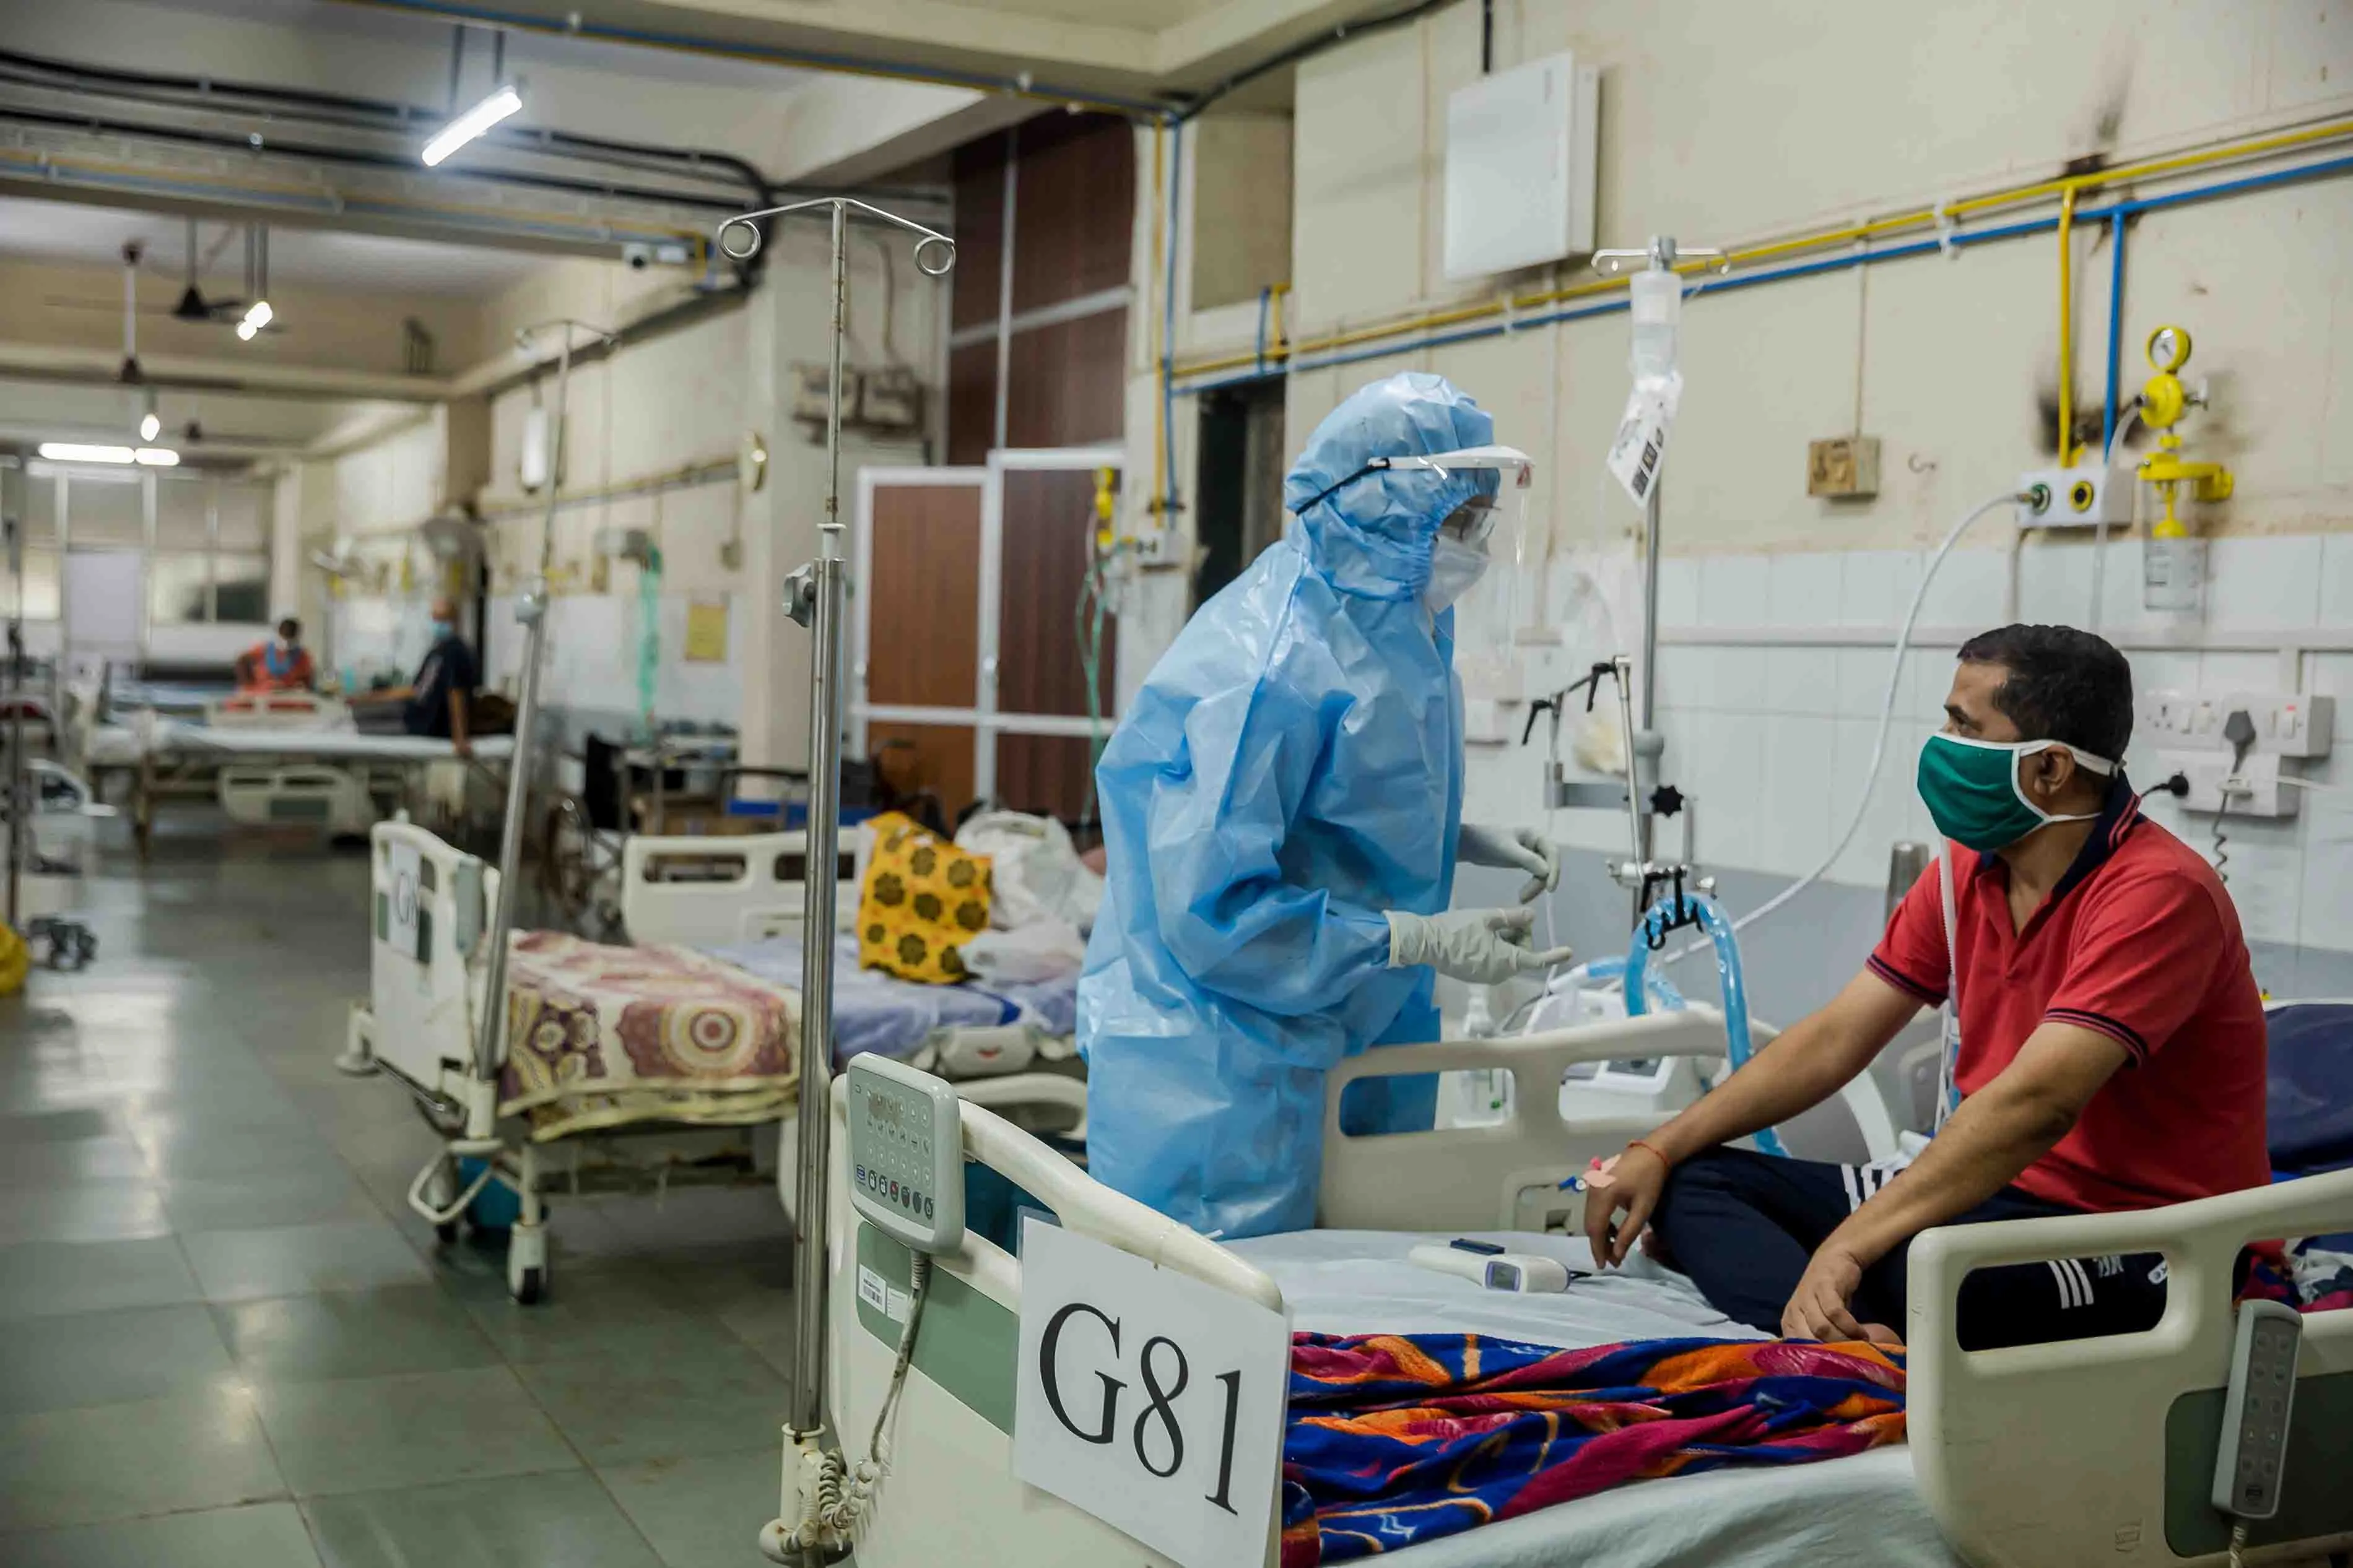 MSF's Dr Ilham checking on a patient at a hospital in Mumbai, India.